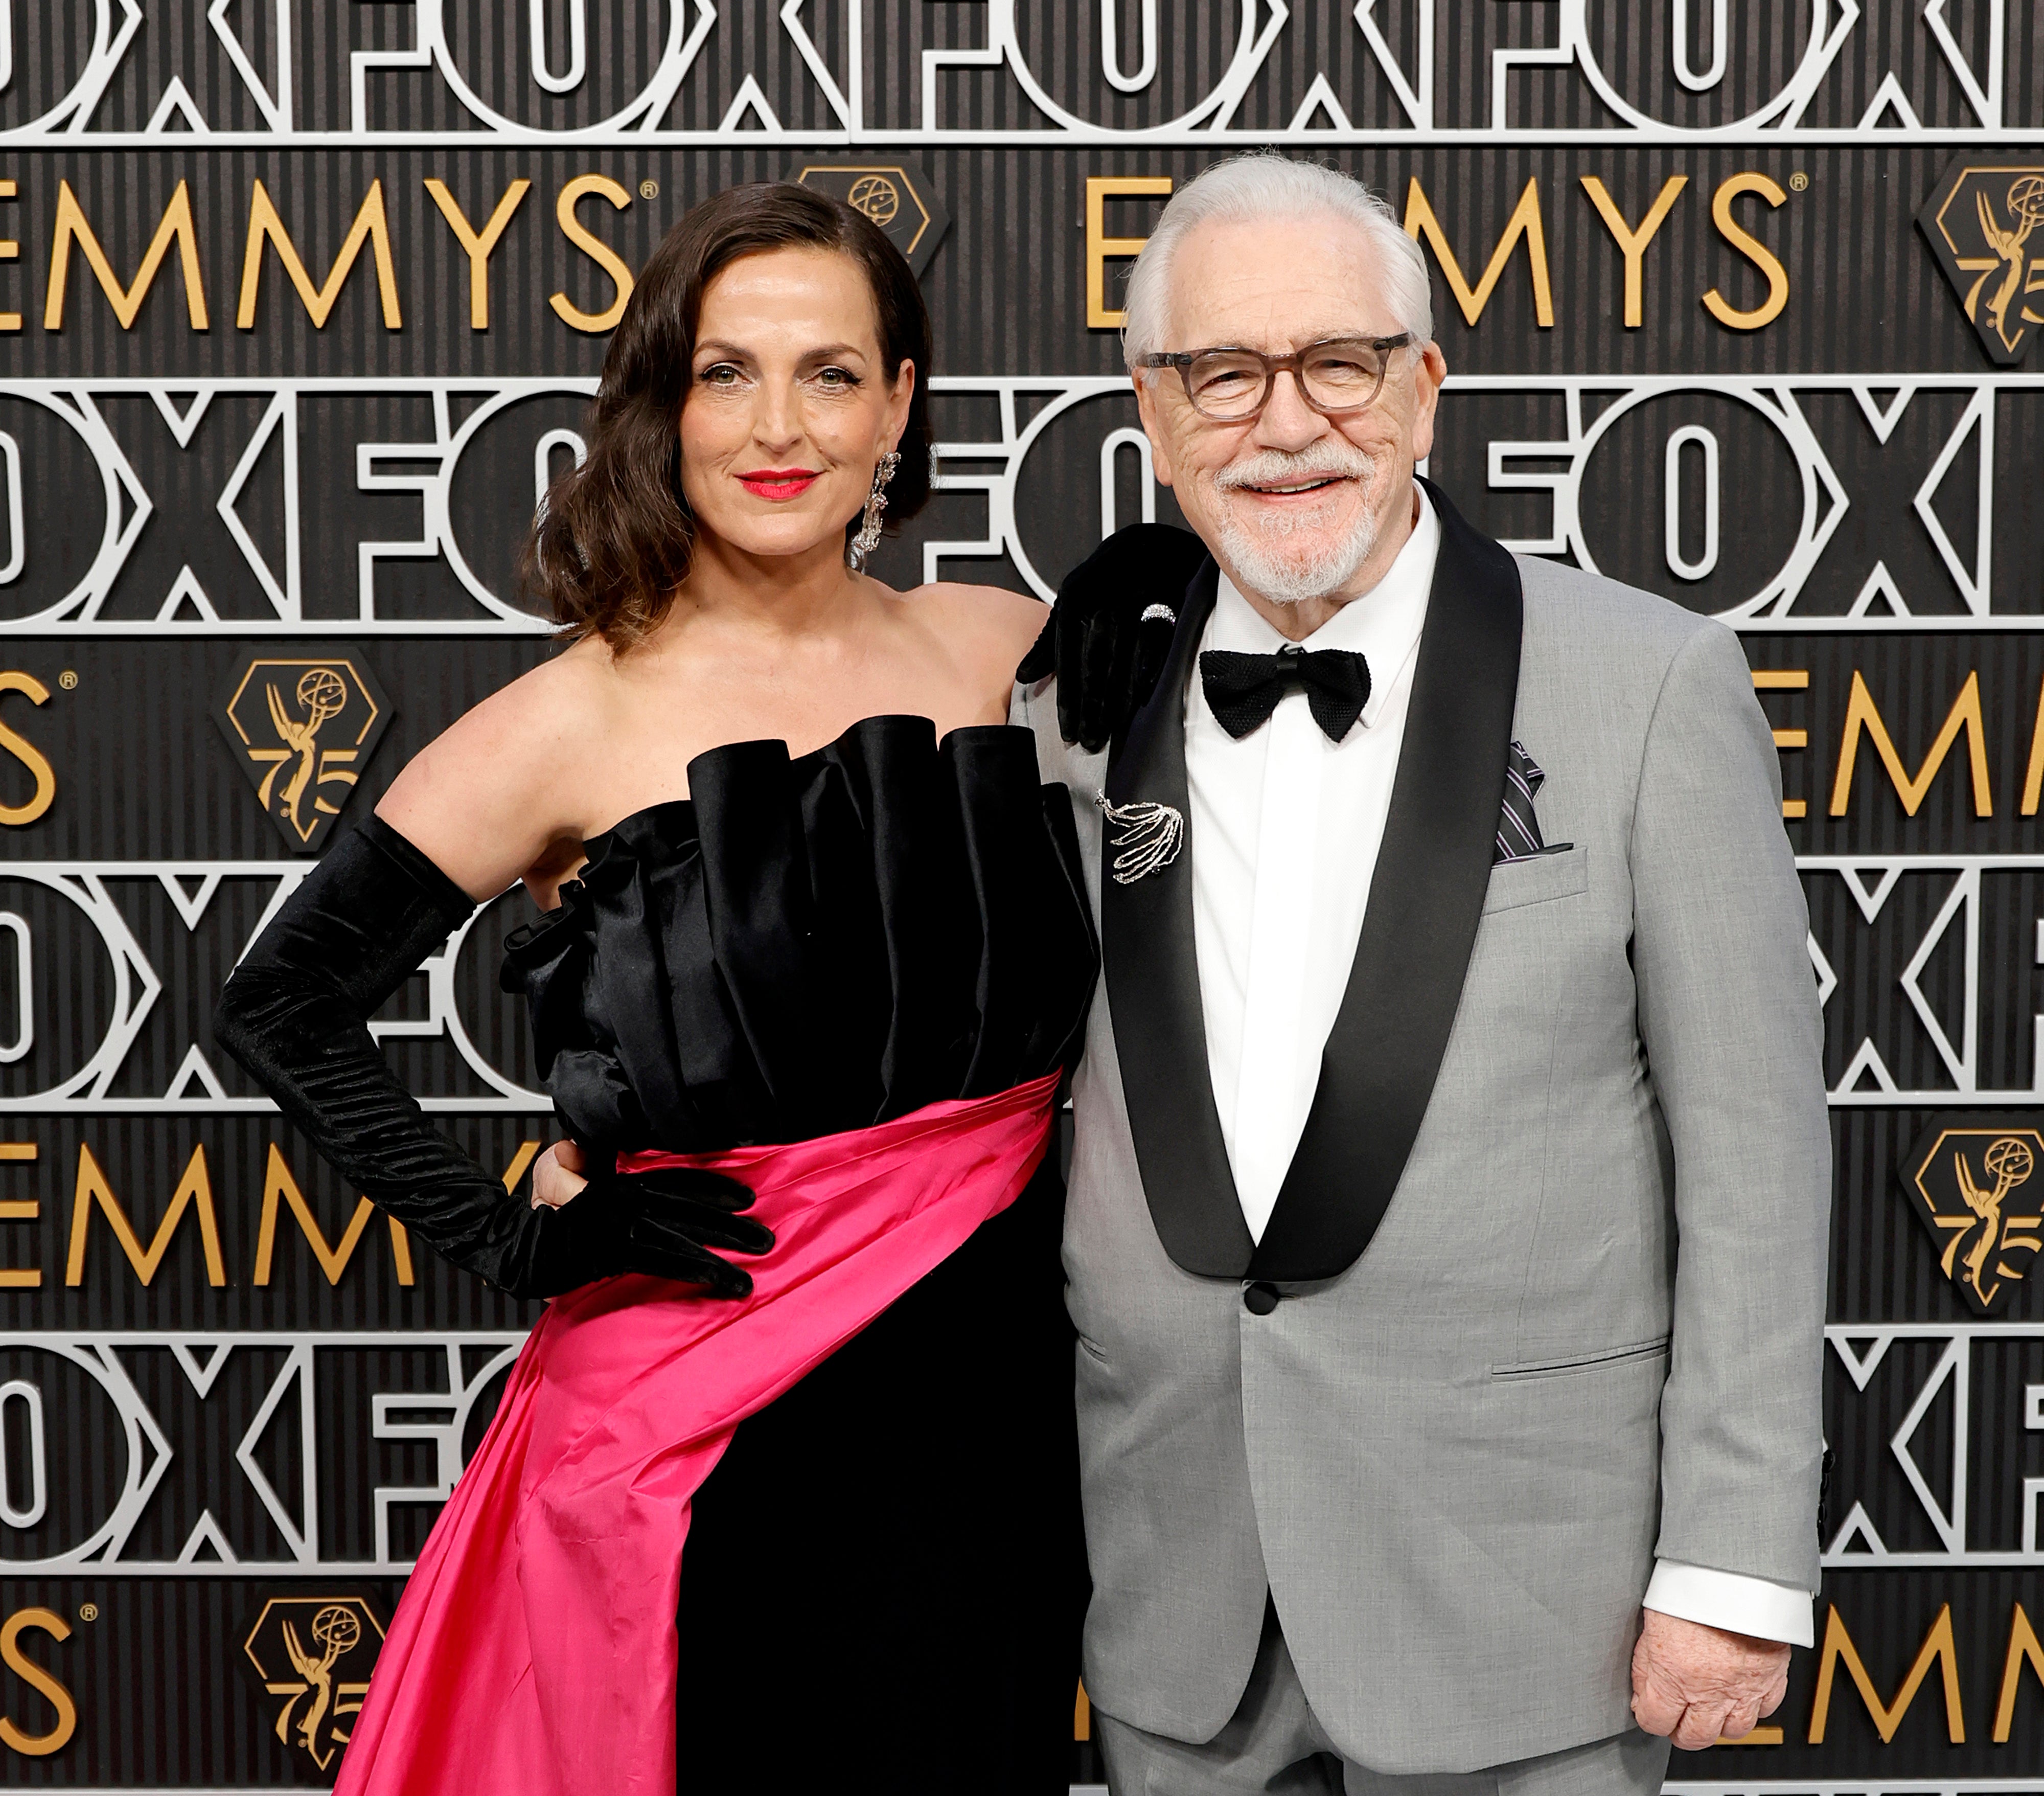 Cox and his wife Nicole Ansari at the Emmys in January